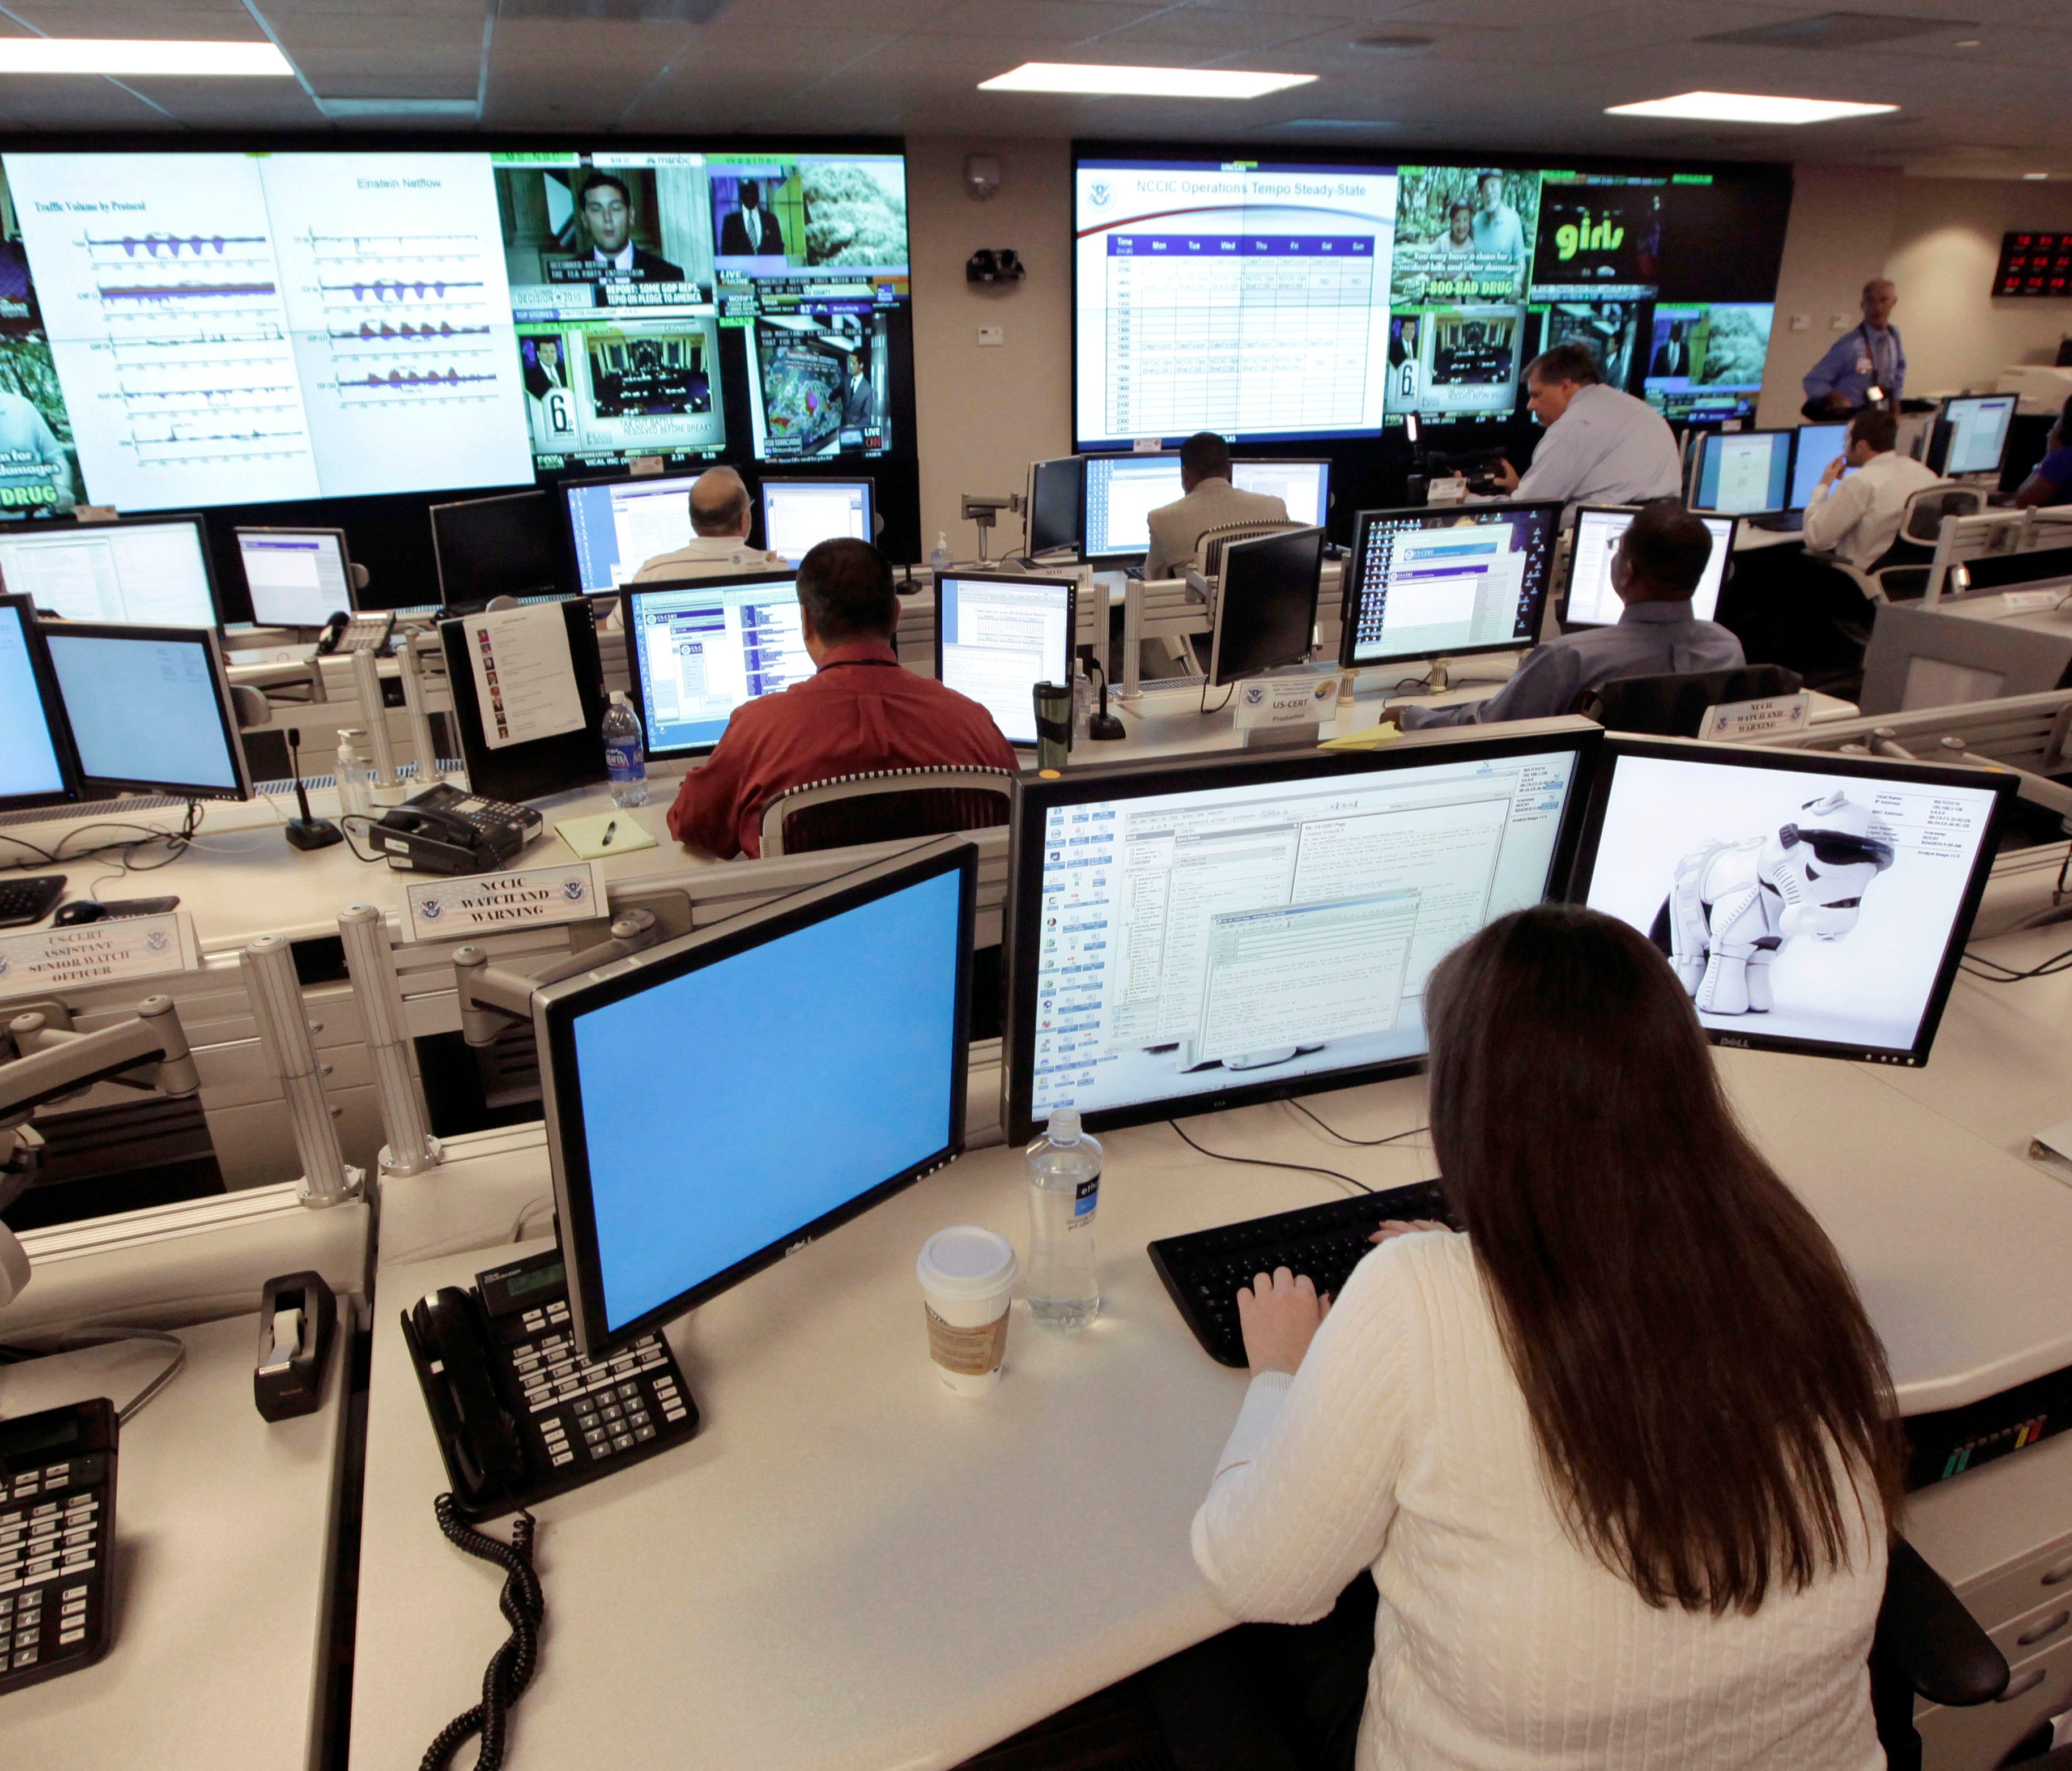 File photo taken in 2010 shows the National Cybersecurity & Communications Integration Center (NCCIC) preparing for the Cyber Storm III exercise at its operations center in Arlington, Va.